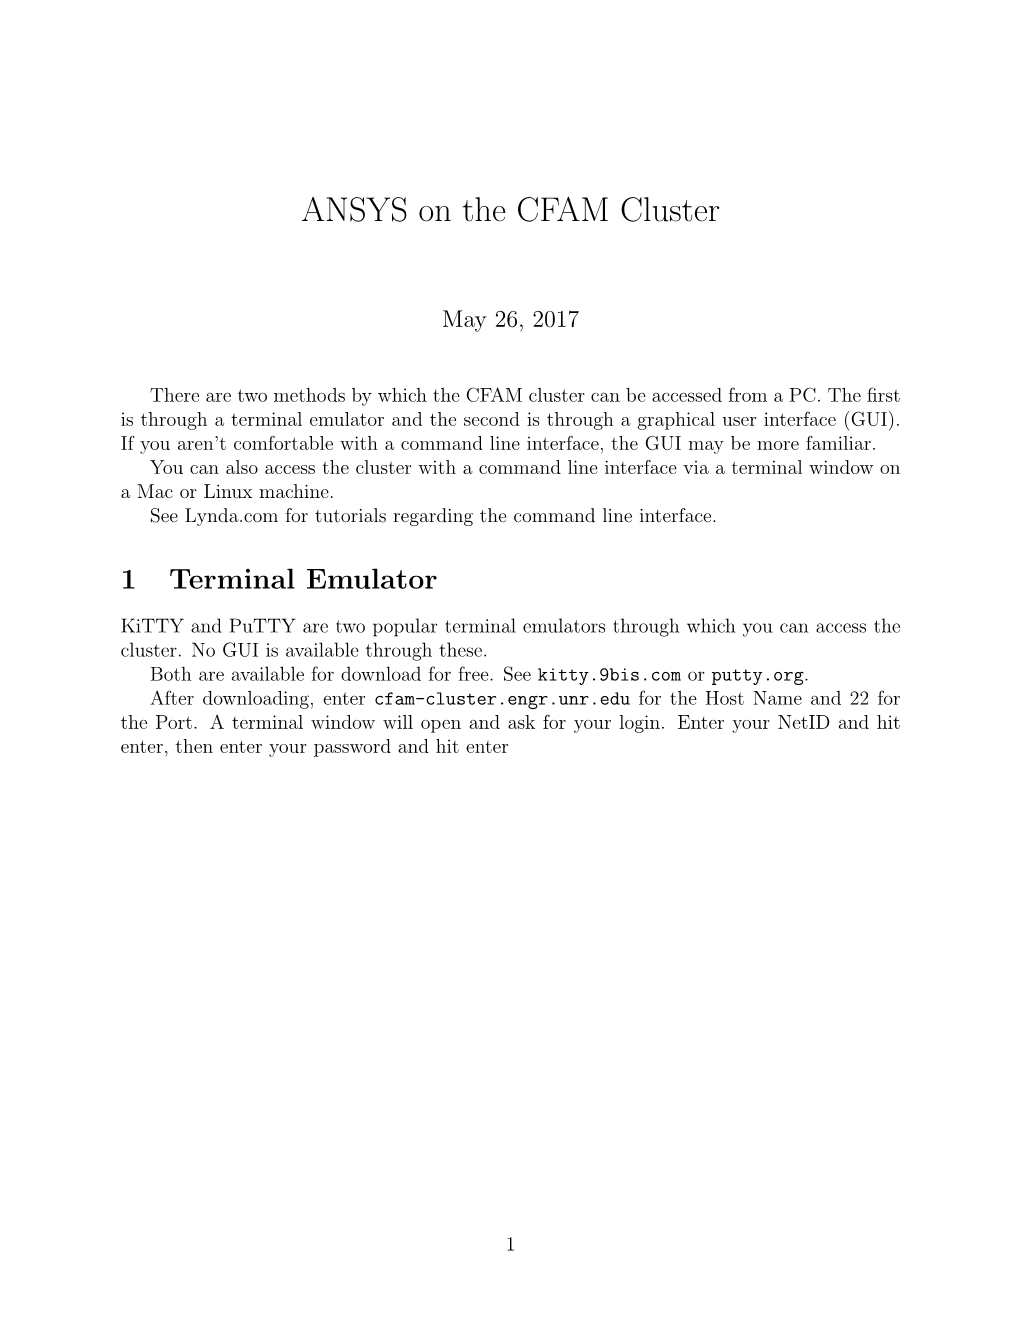 ANSYS on the CFAM Cluster